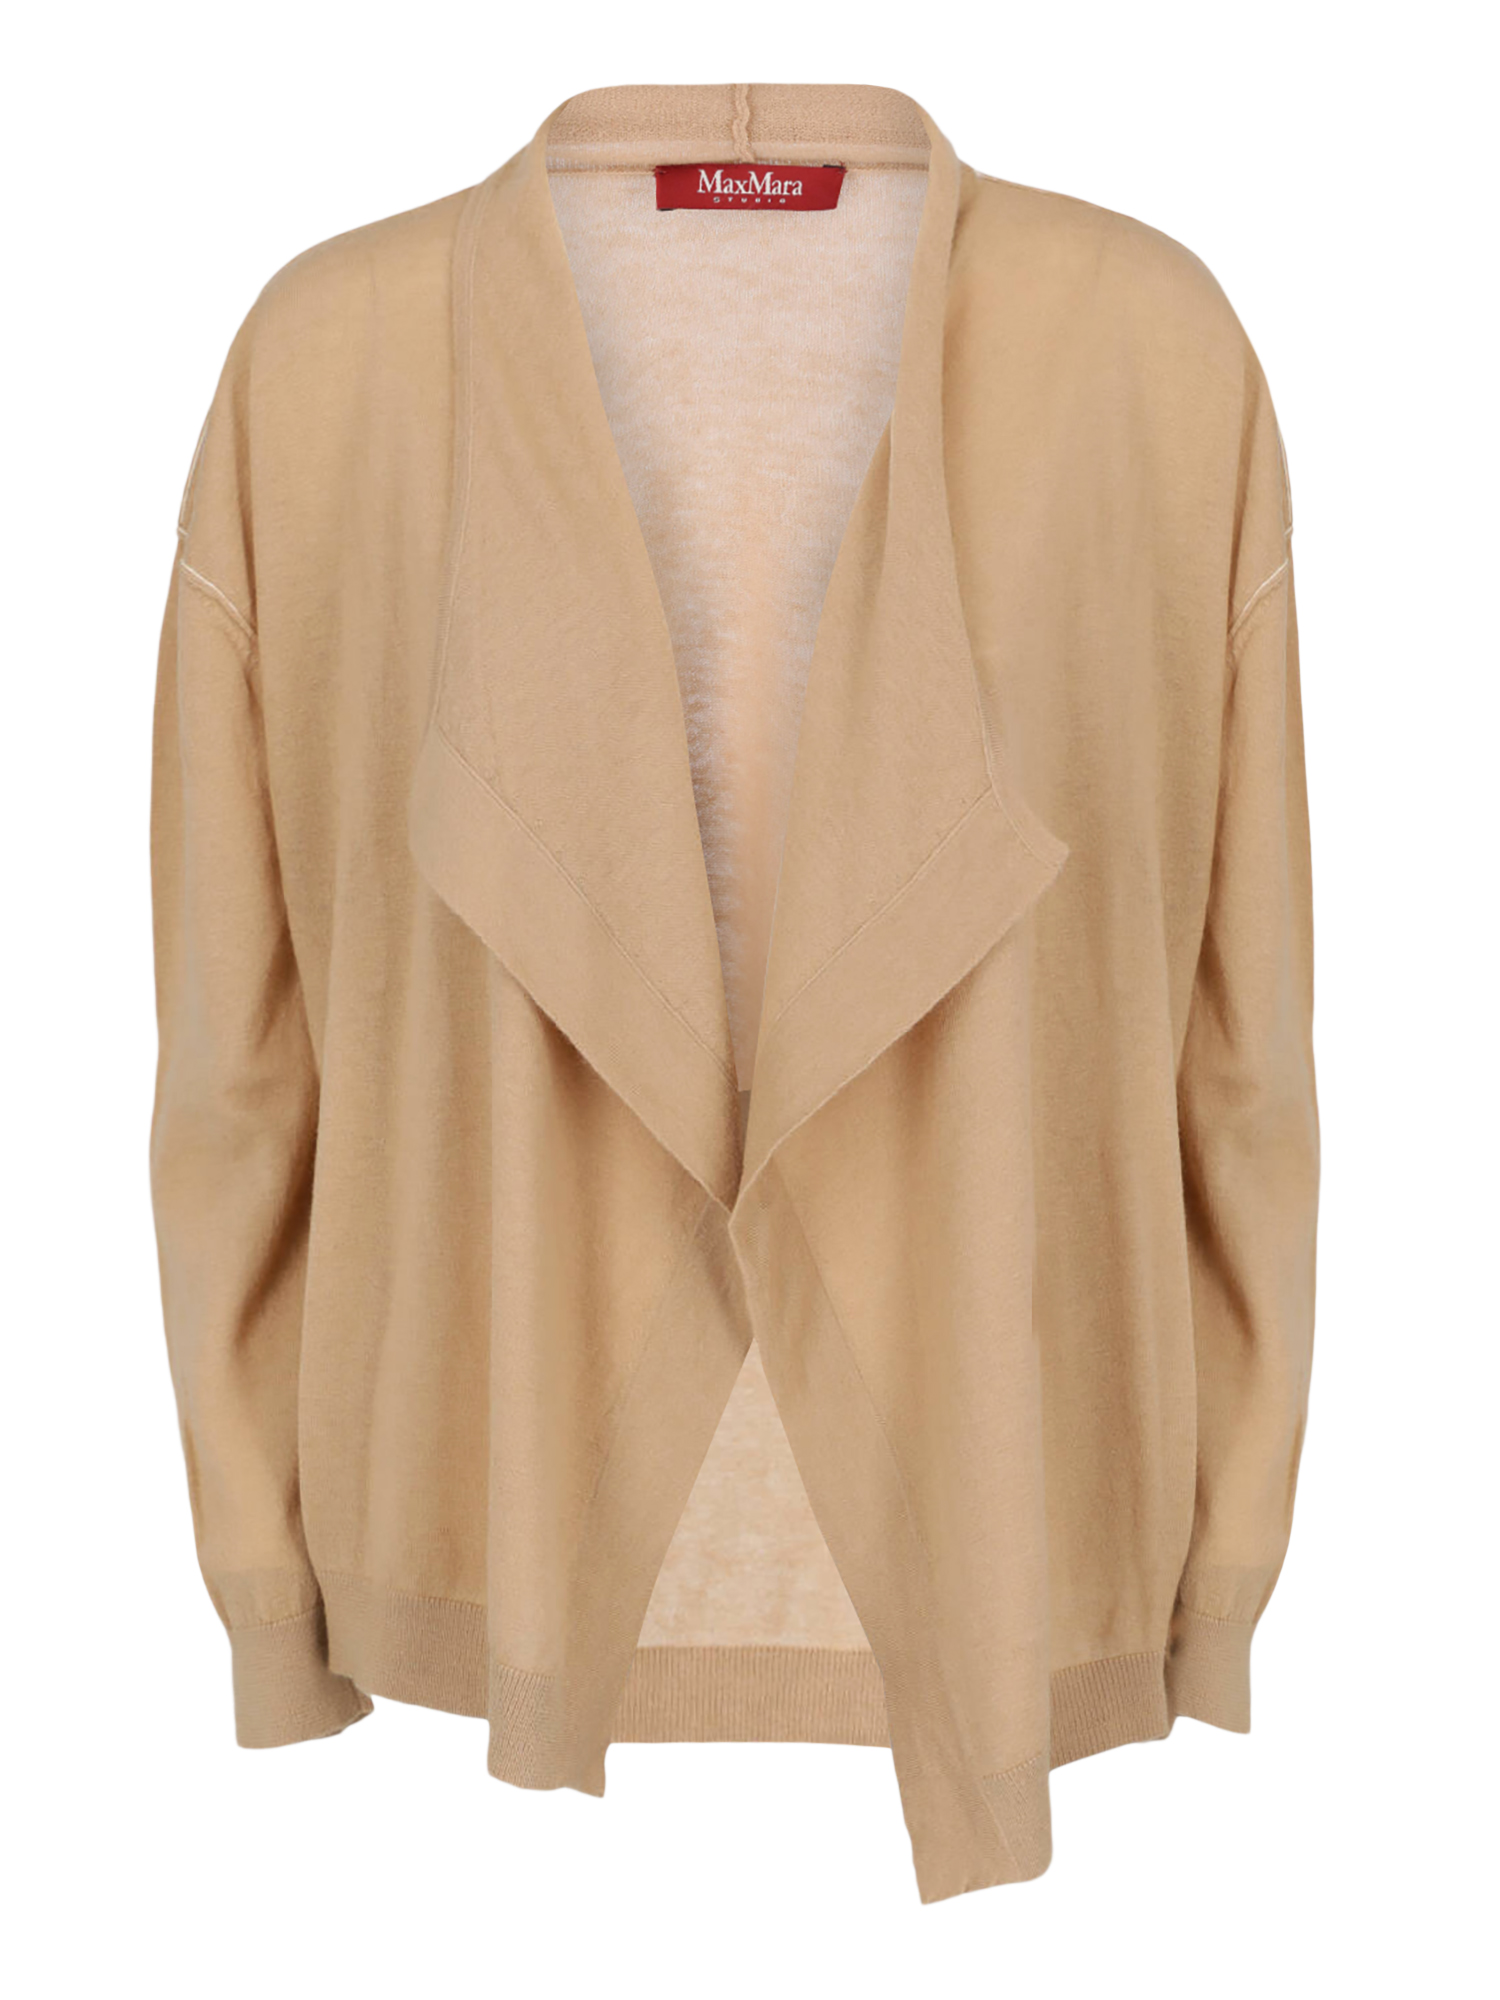 Pre-owned Max Mara Women's Knitwear & Sweatshirts -  - In Camel Color Fabric